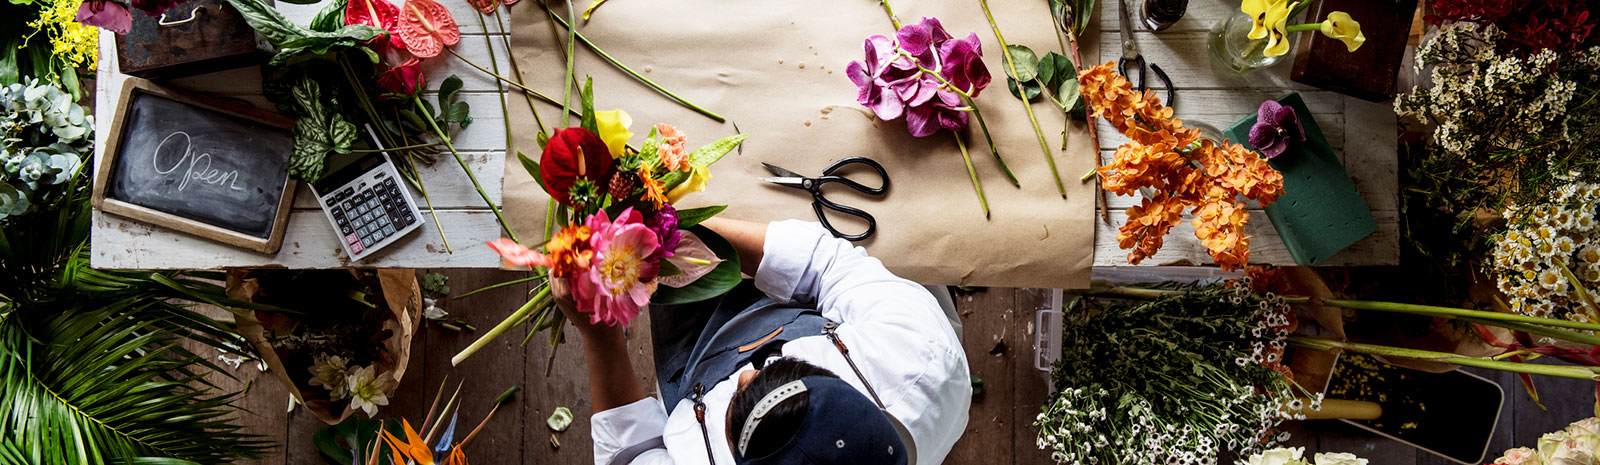 top-down view of a worker cutting flowers